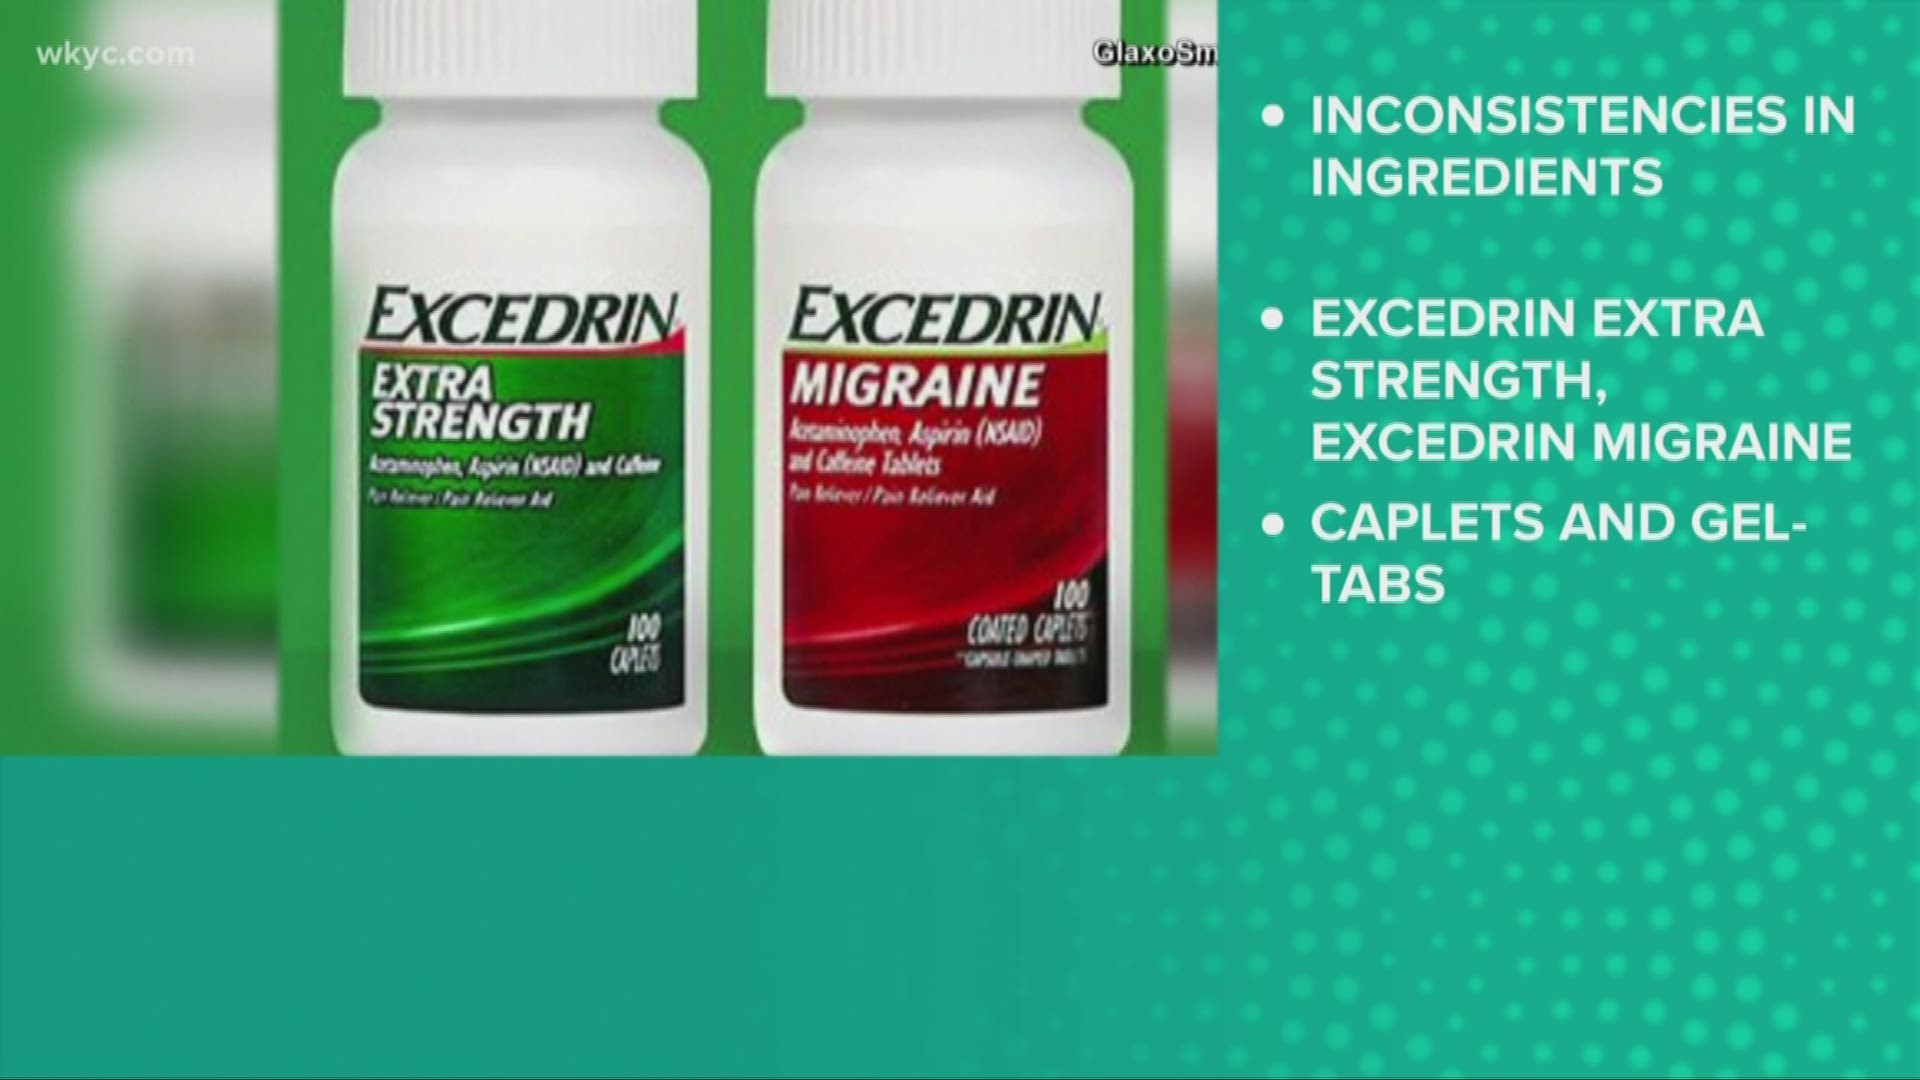 Excedrin has stopped production due to inconsistencies in their ingredients.